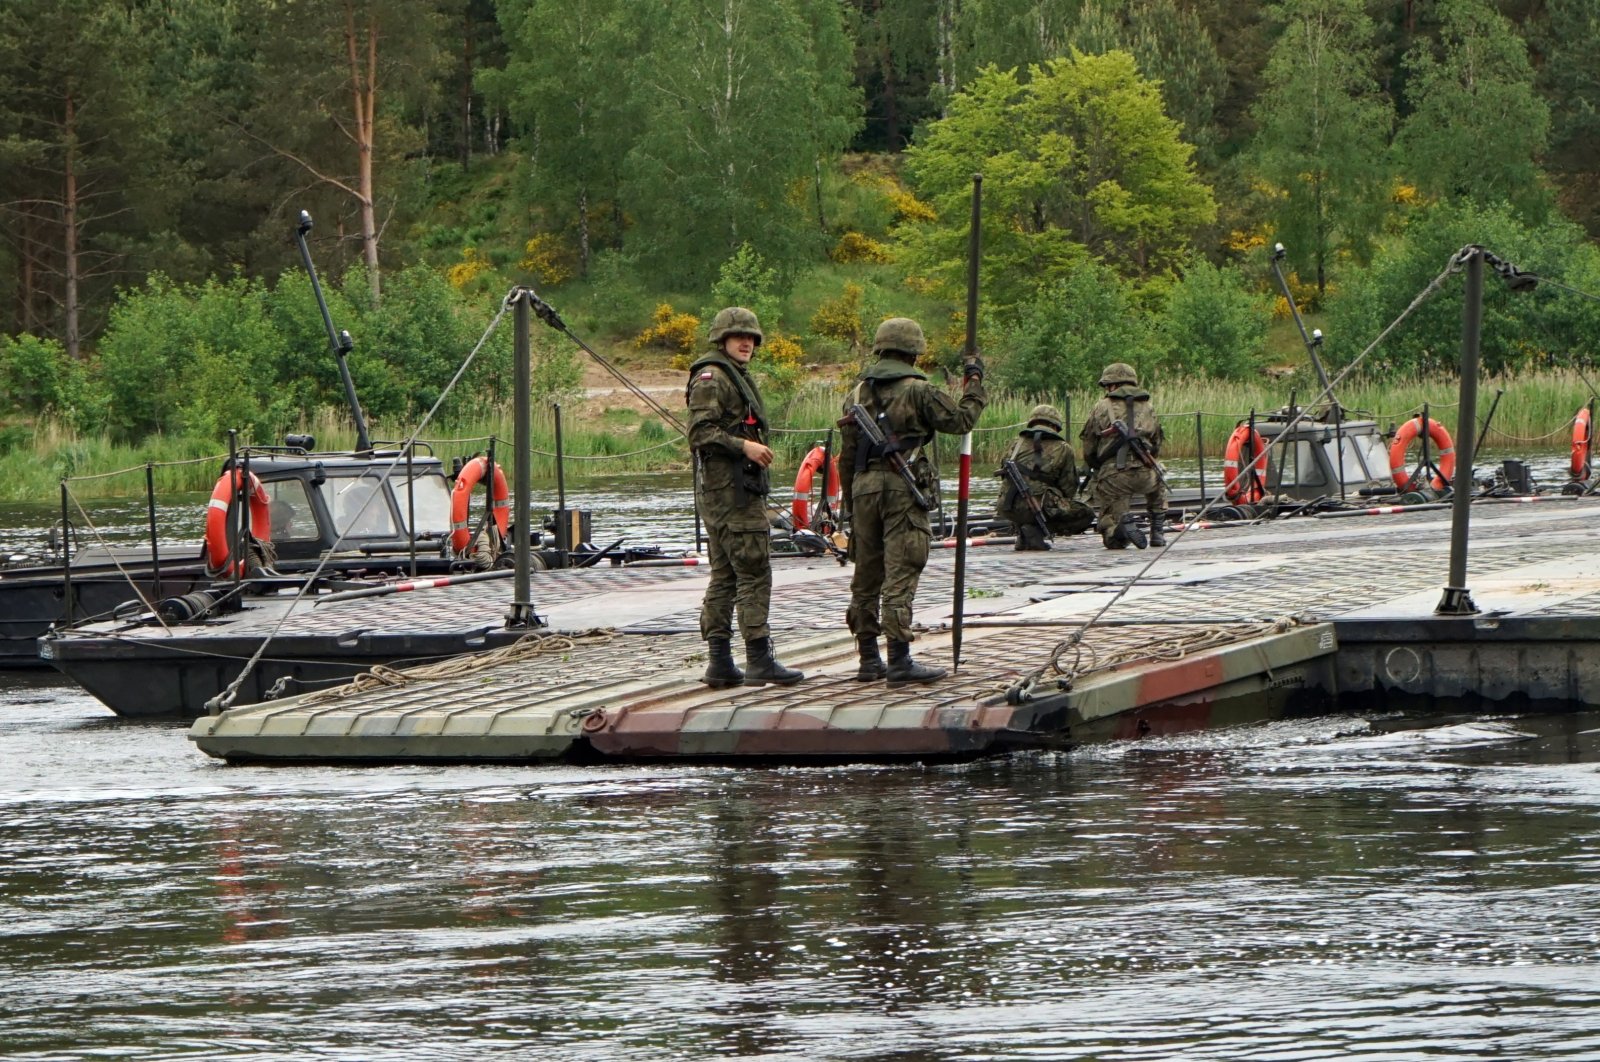 Polish soldiers build a pontoon bridge during exercises at a military training ground in Drawsko Pomorskie, north-western Poland, June 7, 2020. (EPA Photo)